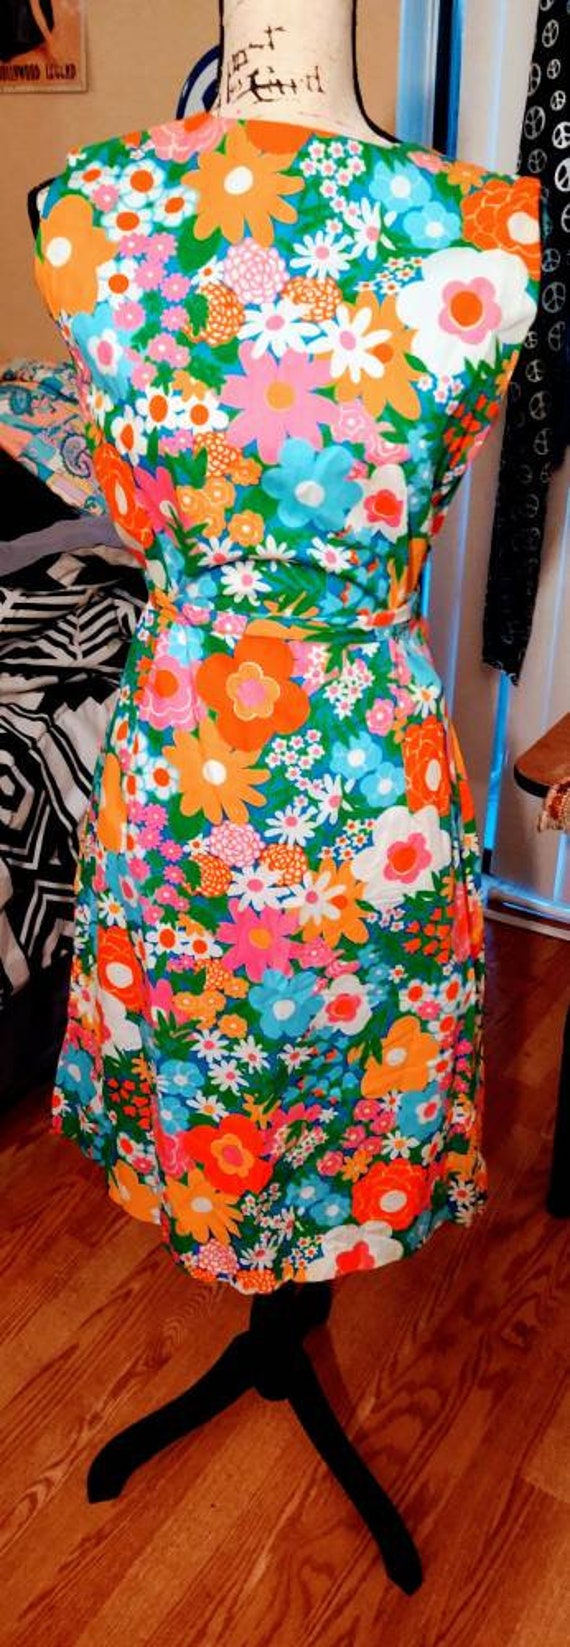 1960s Psychedelic Flower Patterned Apron Dress